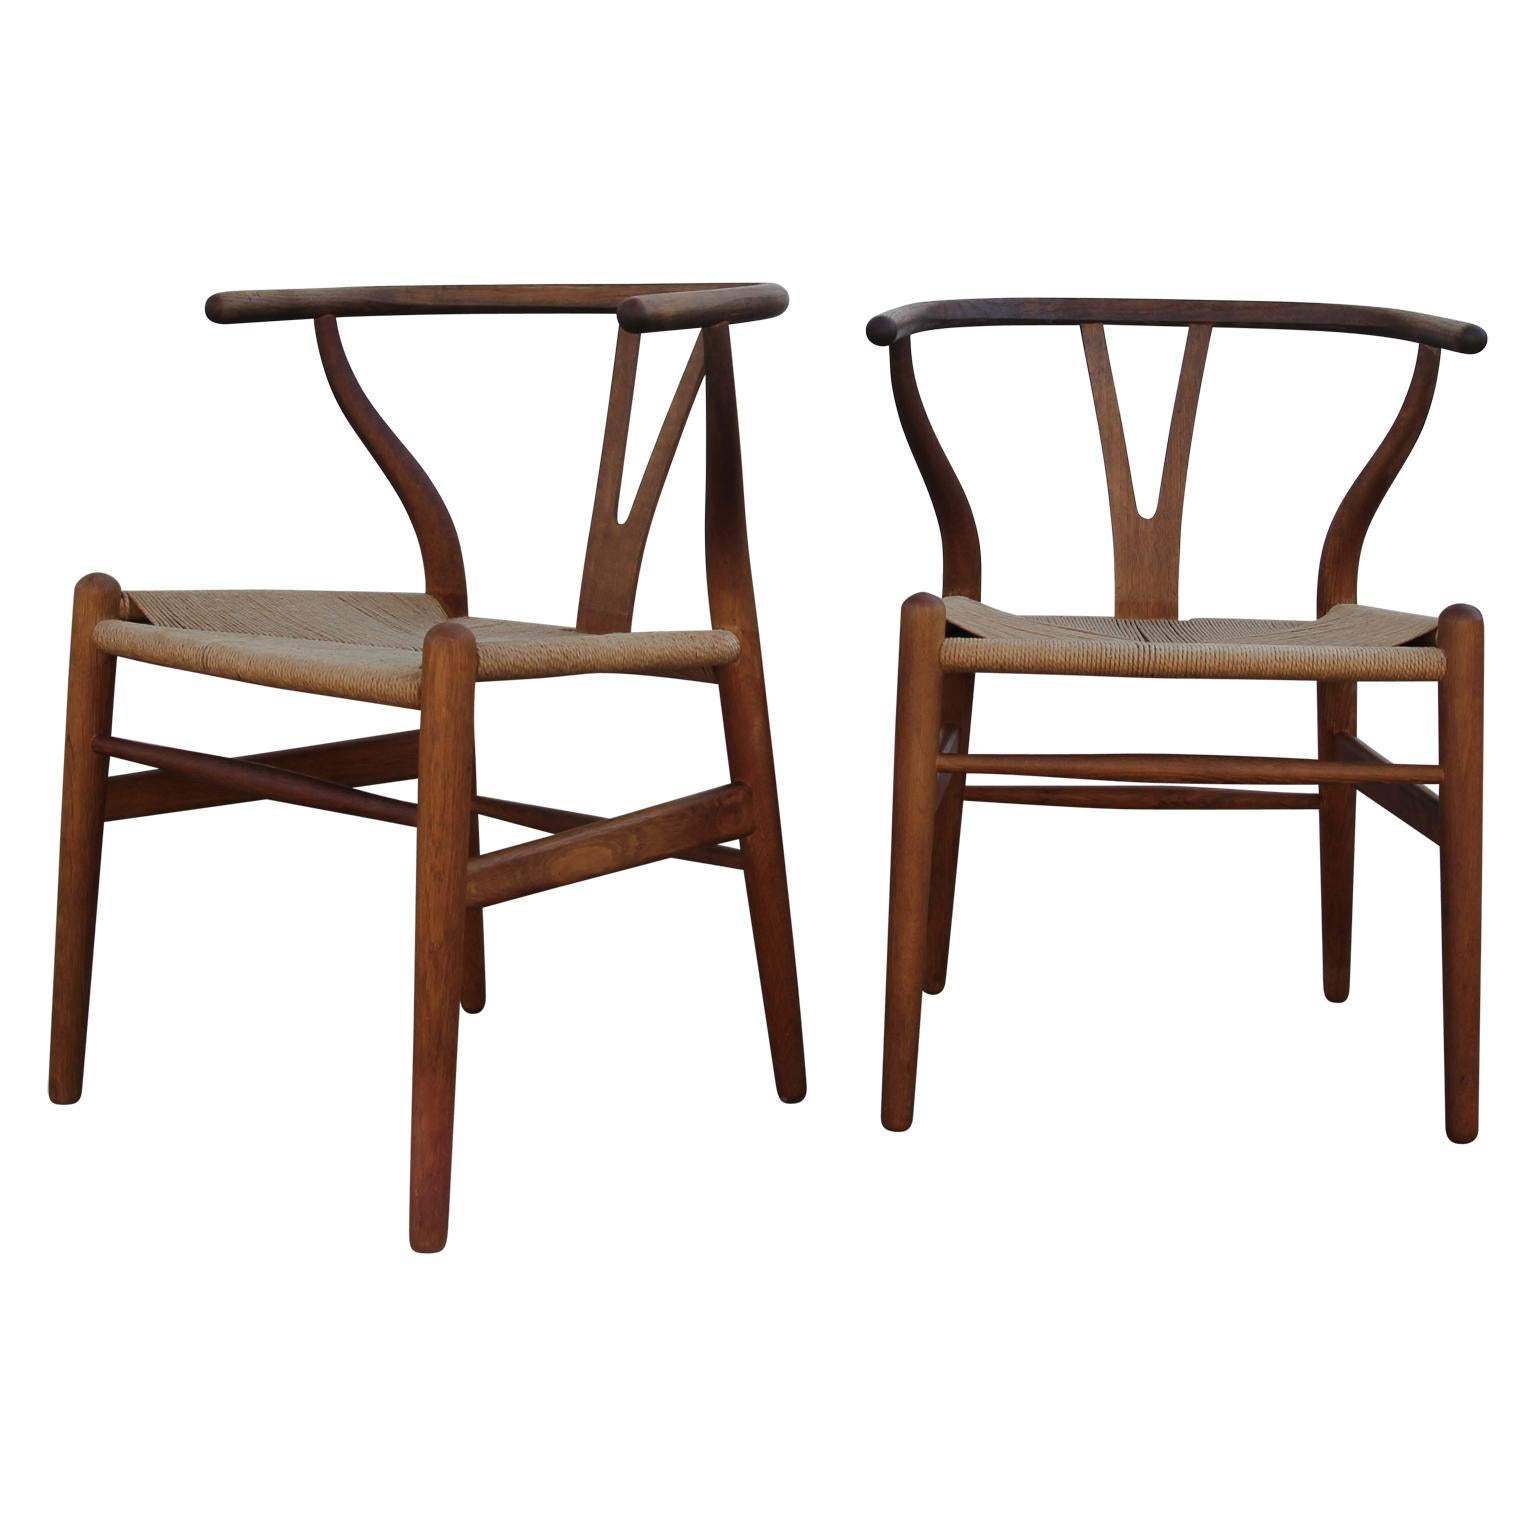 In 1944, Danish designer Hans Wegner began a series of chairs that were inspired by portraits of Danish merchants sitting in Ming chairs. One of these chairs was the Wishbone chair (1949), also known as the 